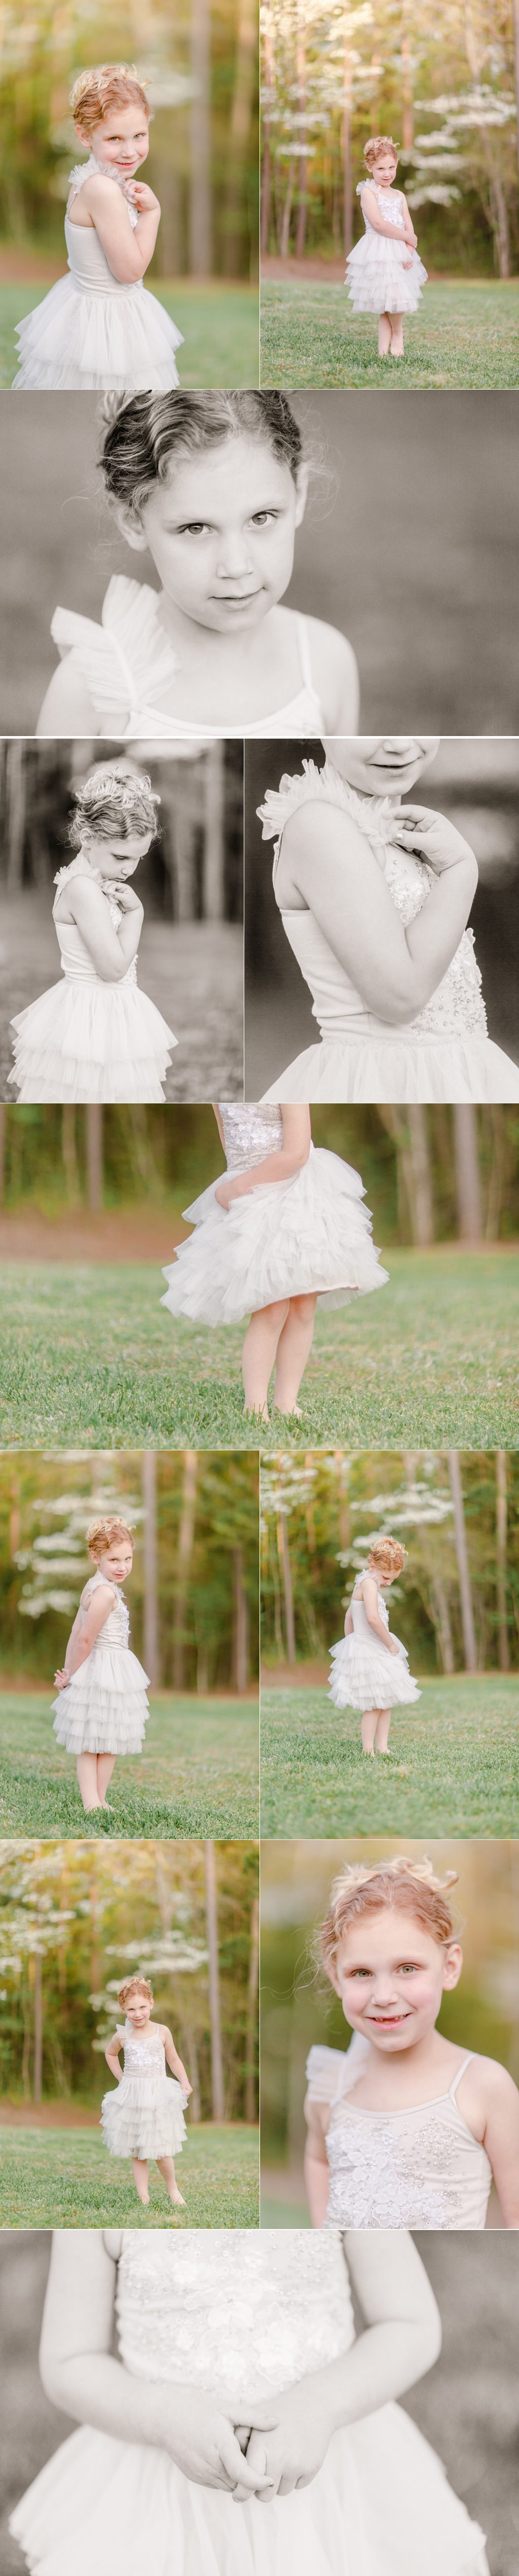 Professional child photography in Oconee County, GA surrounded by dogwood trees.